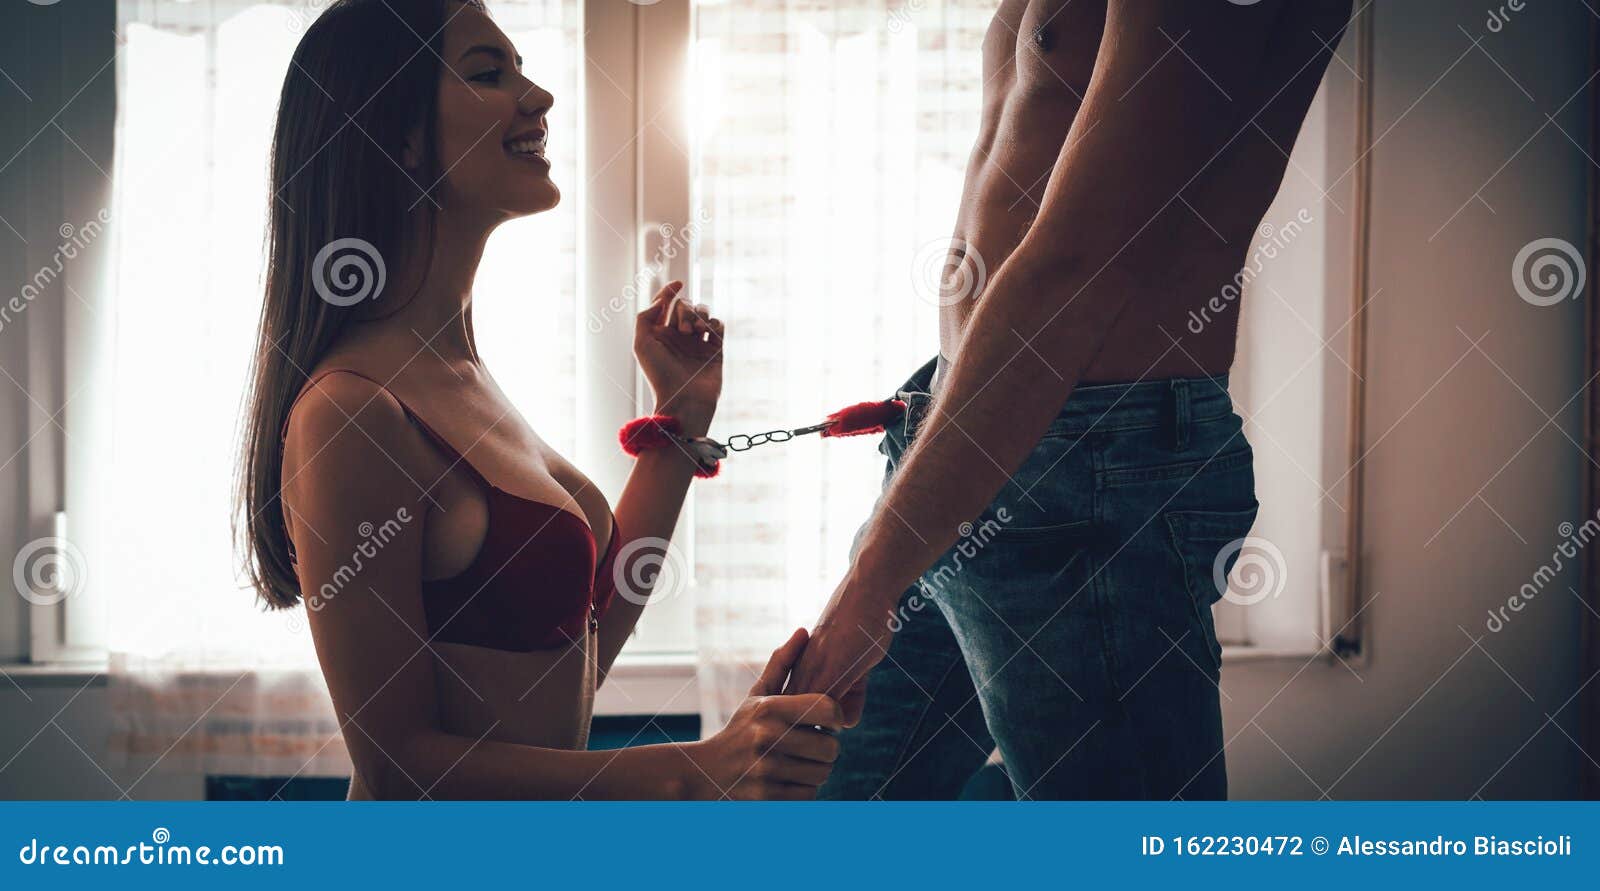 Young Couple Doing Hot Sex Domination Games in the Bed - Sensual Woman Tied Up with Handcuffs while Seducing Her Man Stock Photo